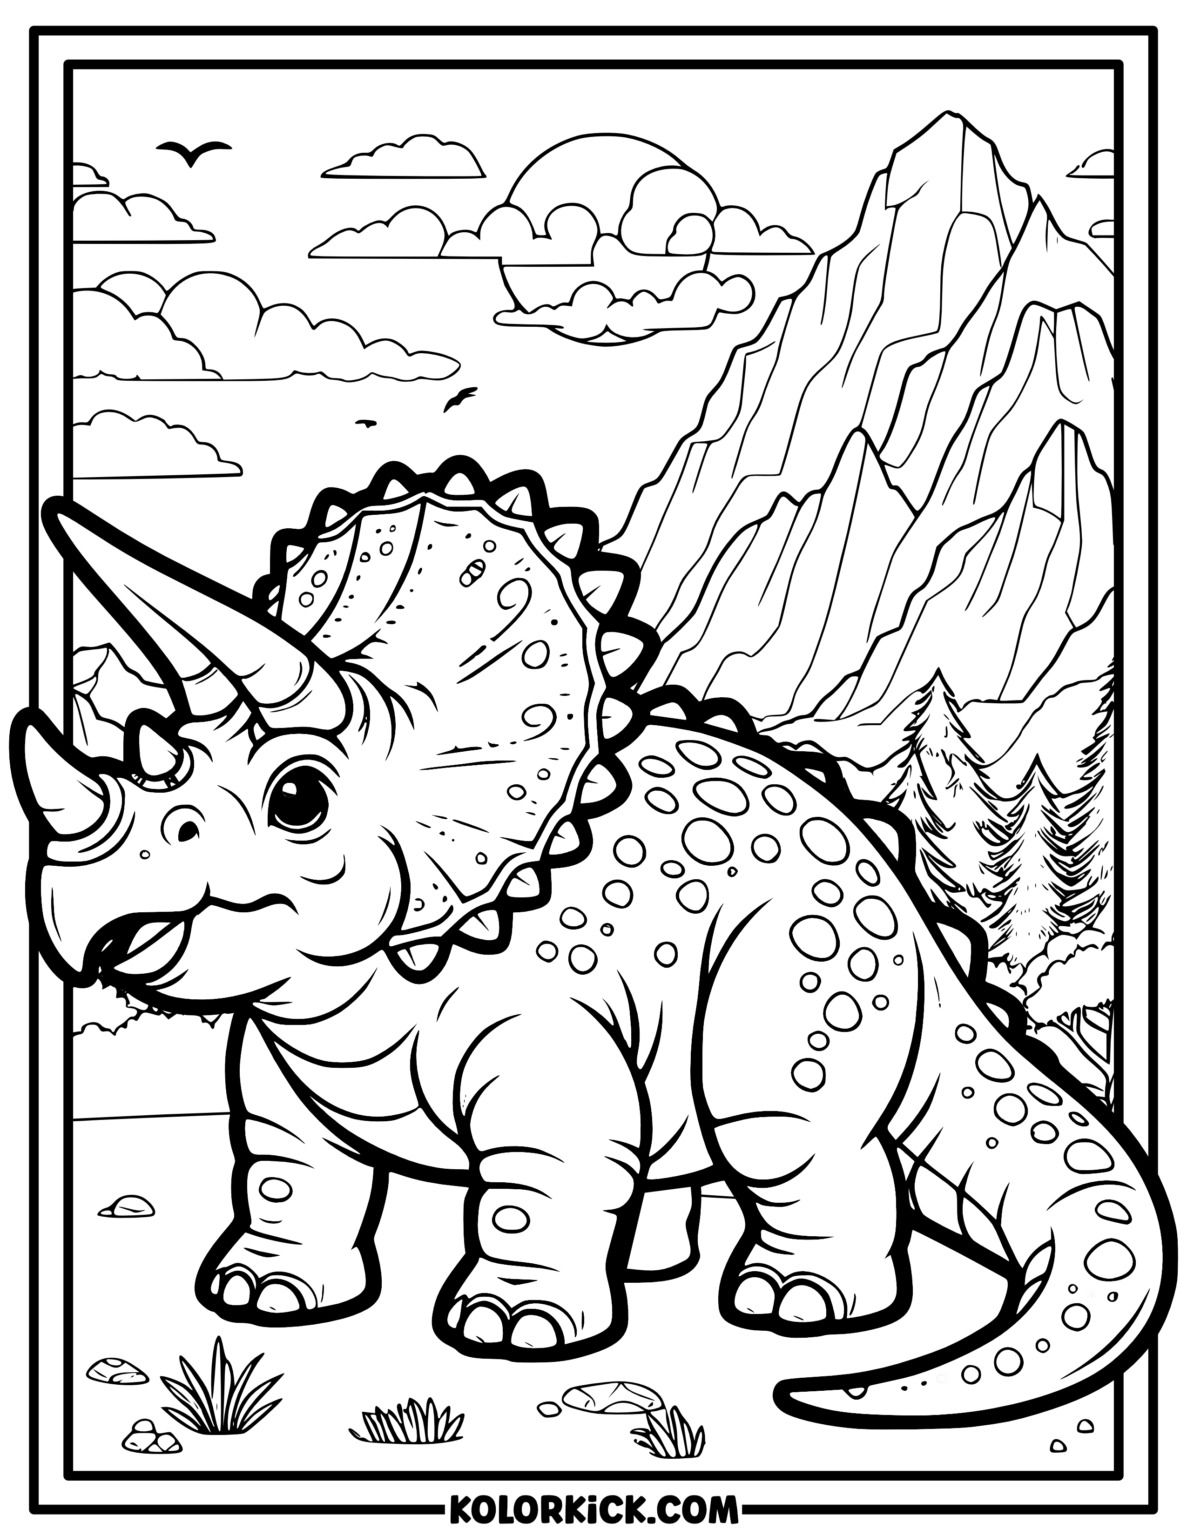 Cute Dinosaur Coloring Pages - 100% Free Printable PDFs